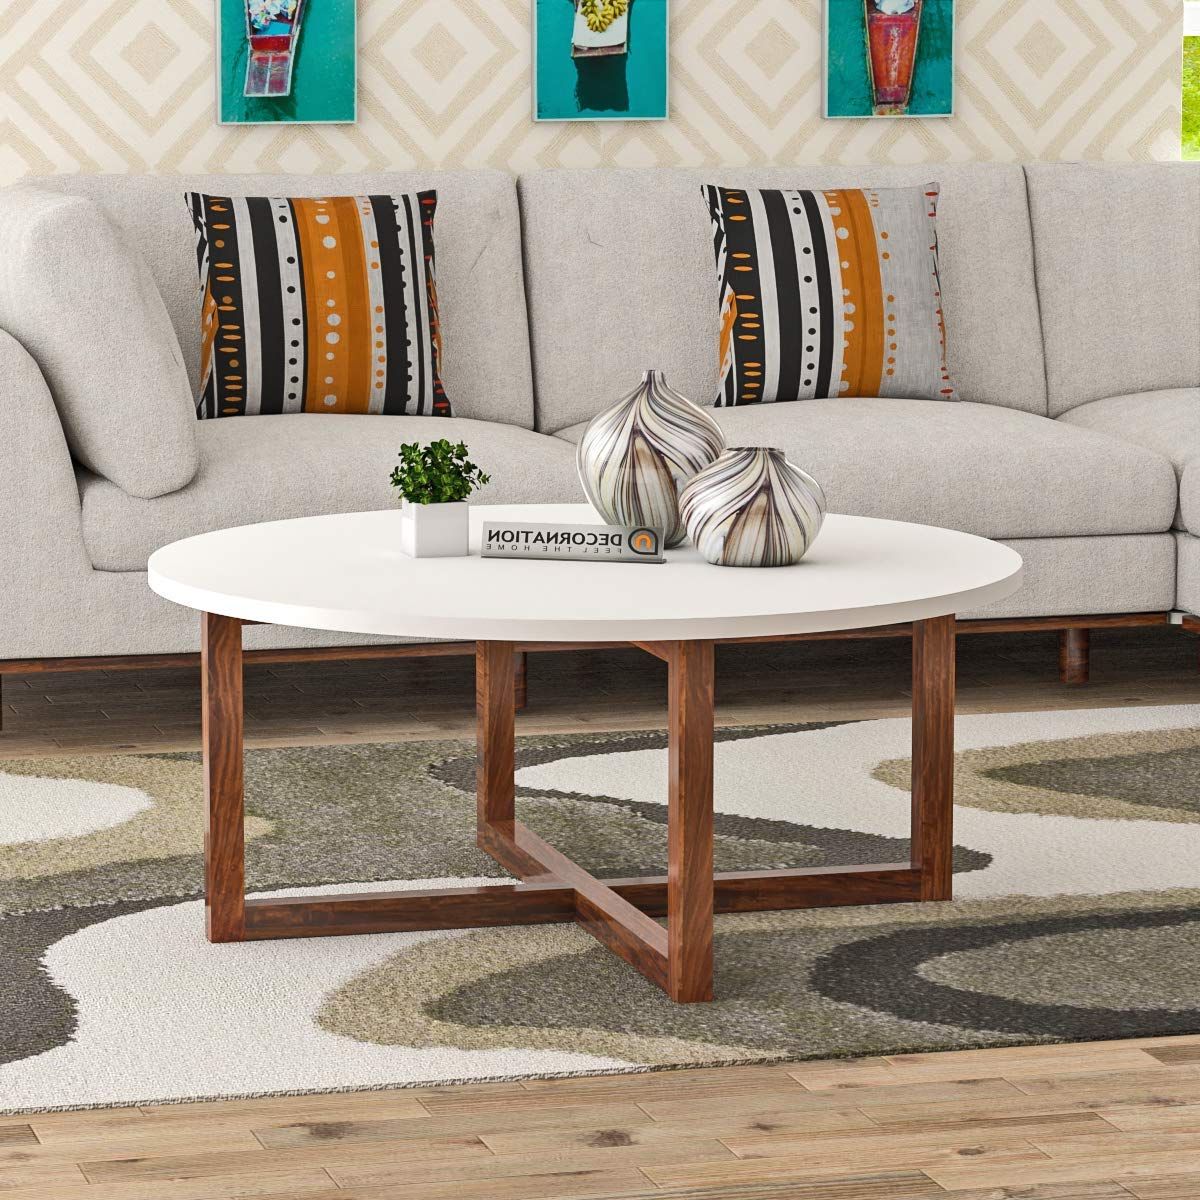 Wooden Mdf Round Coffee Table With Solid Wood Legs – White With Trendy Wood Coffee Tables (View 9 of 20)